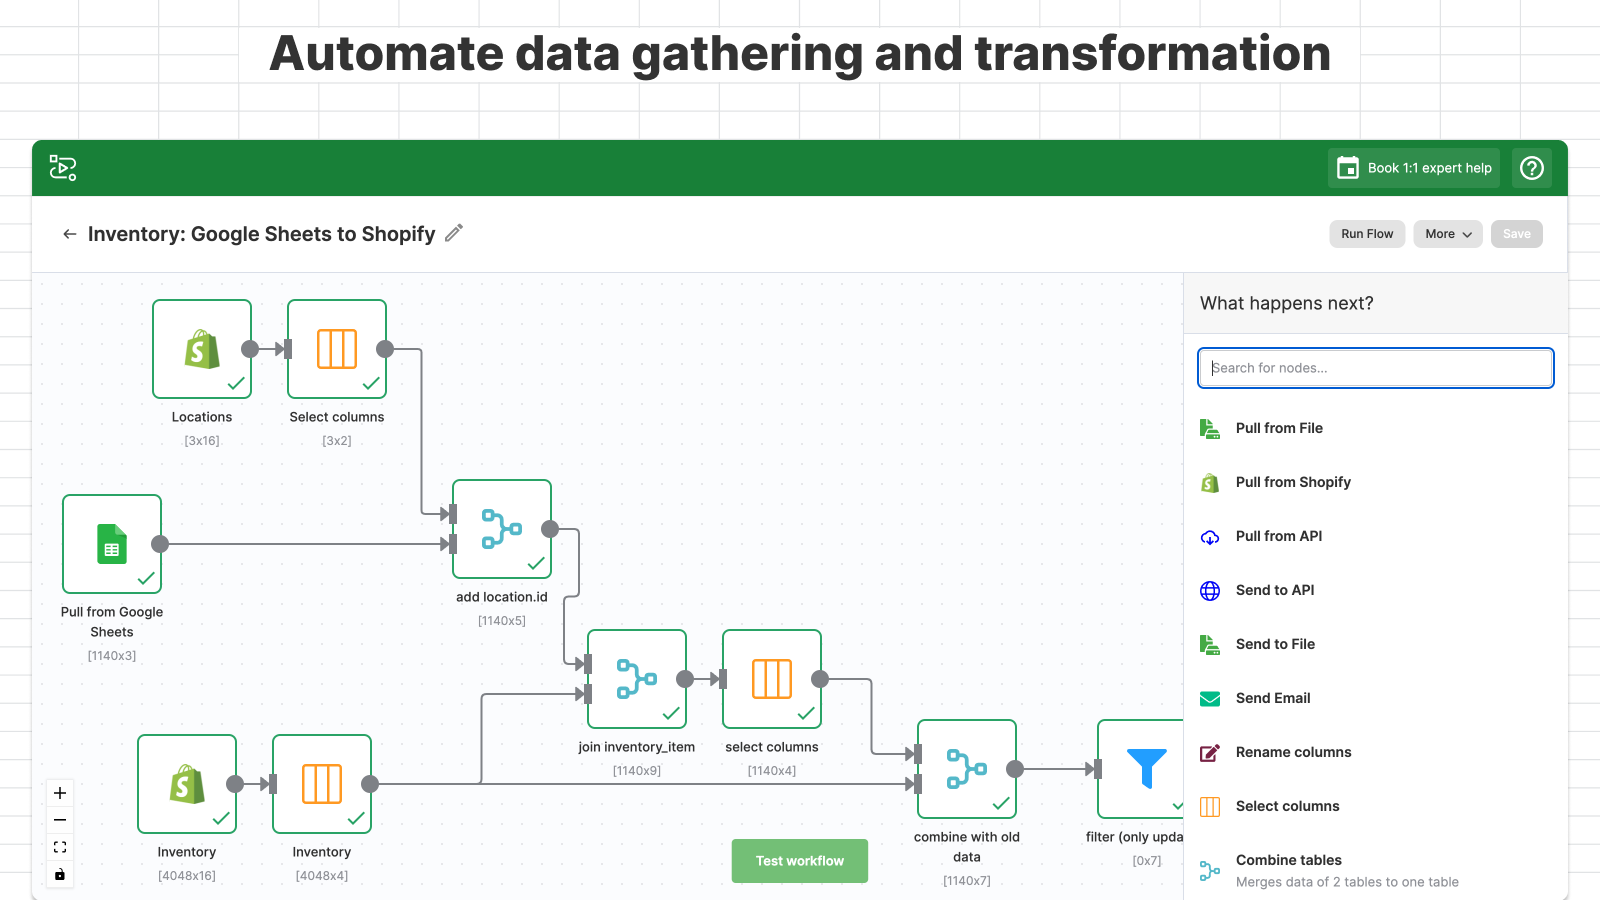 Automate data gathering and transformation